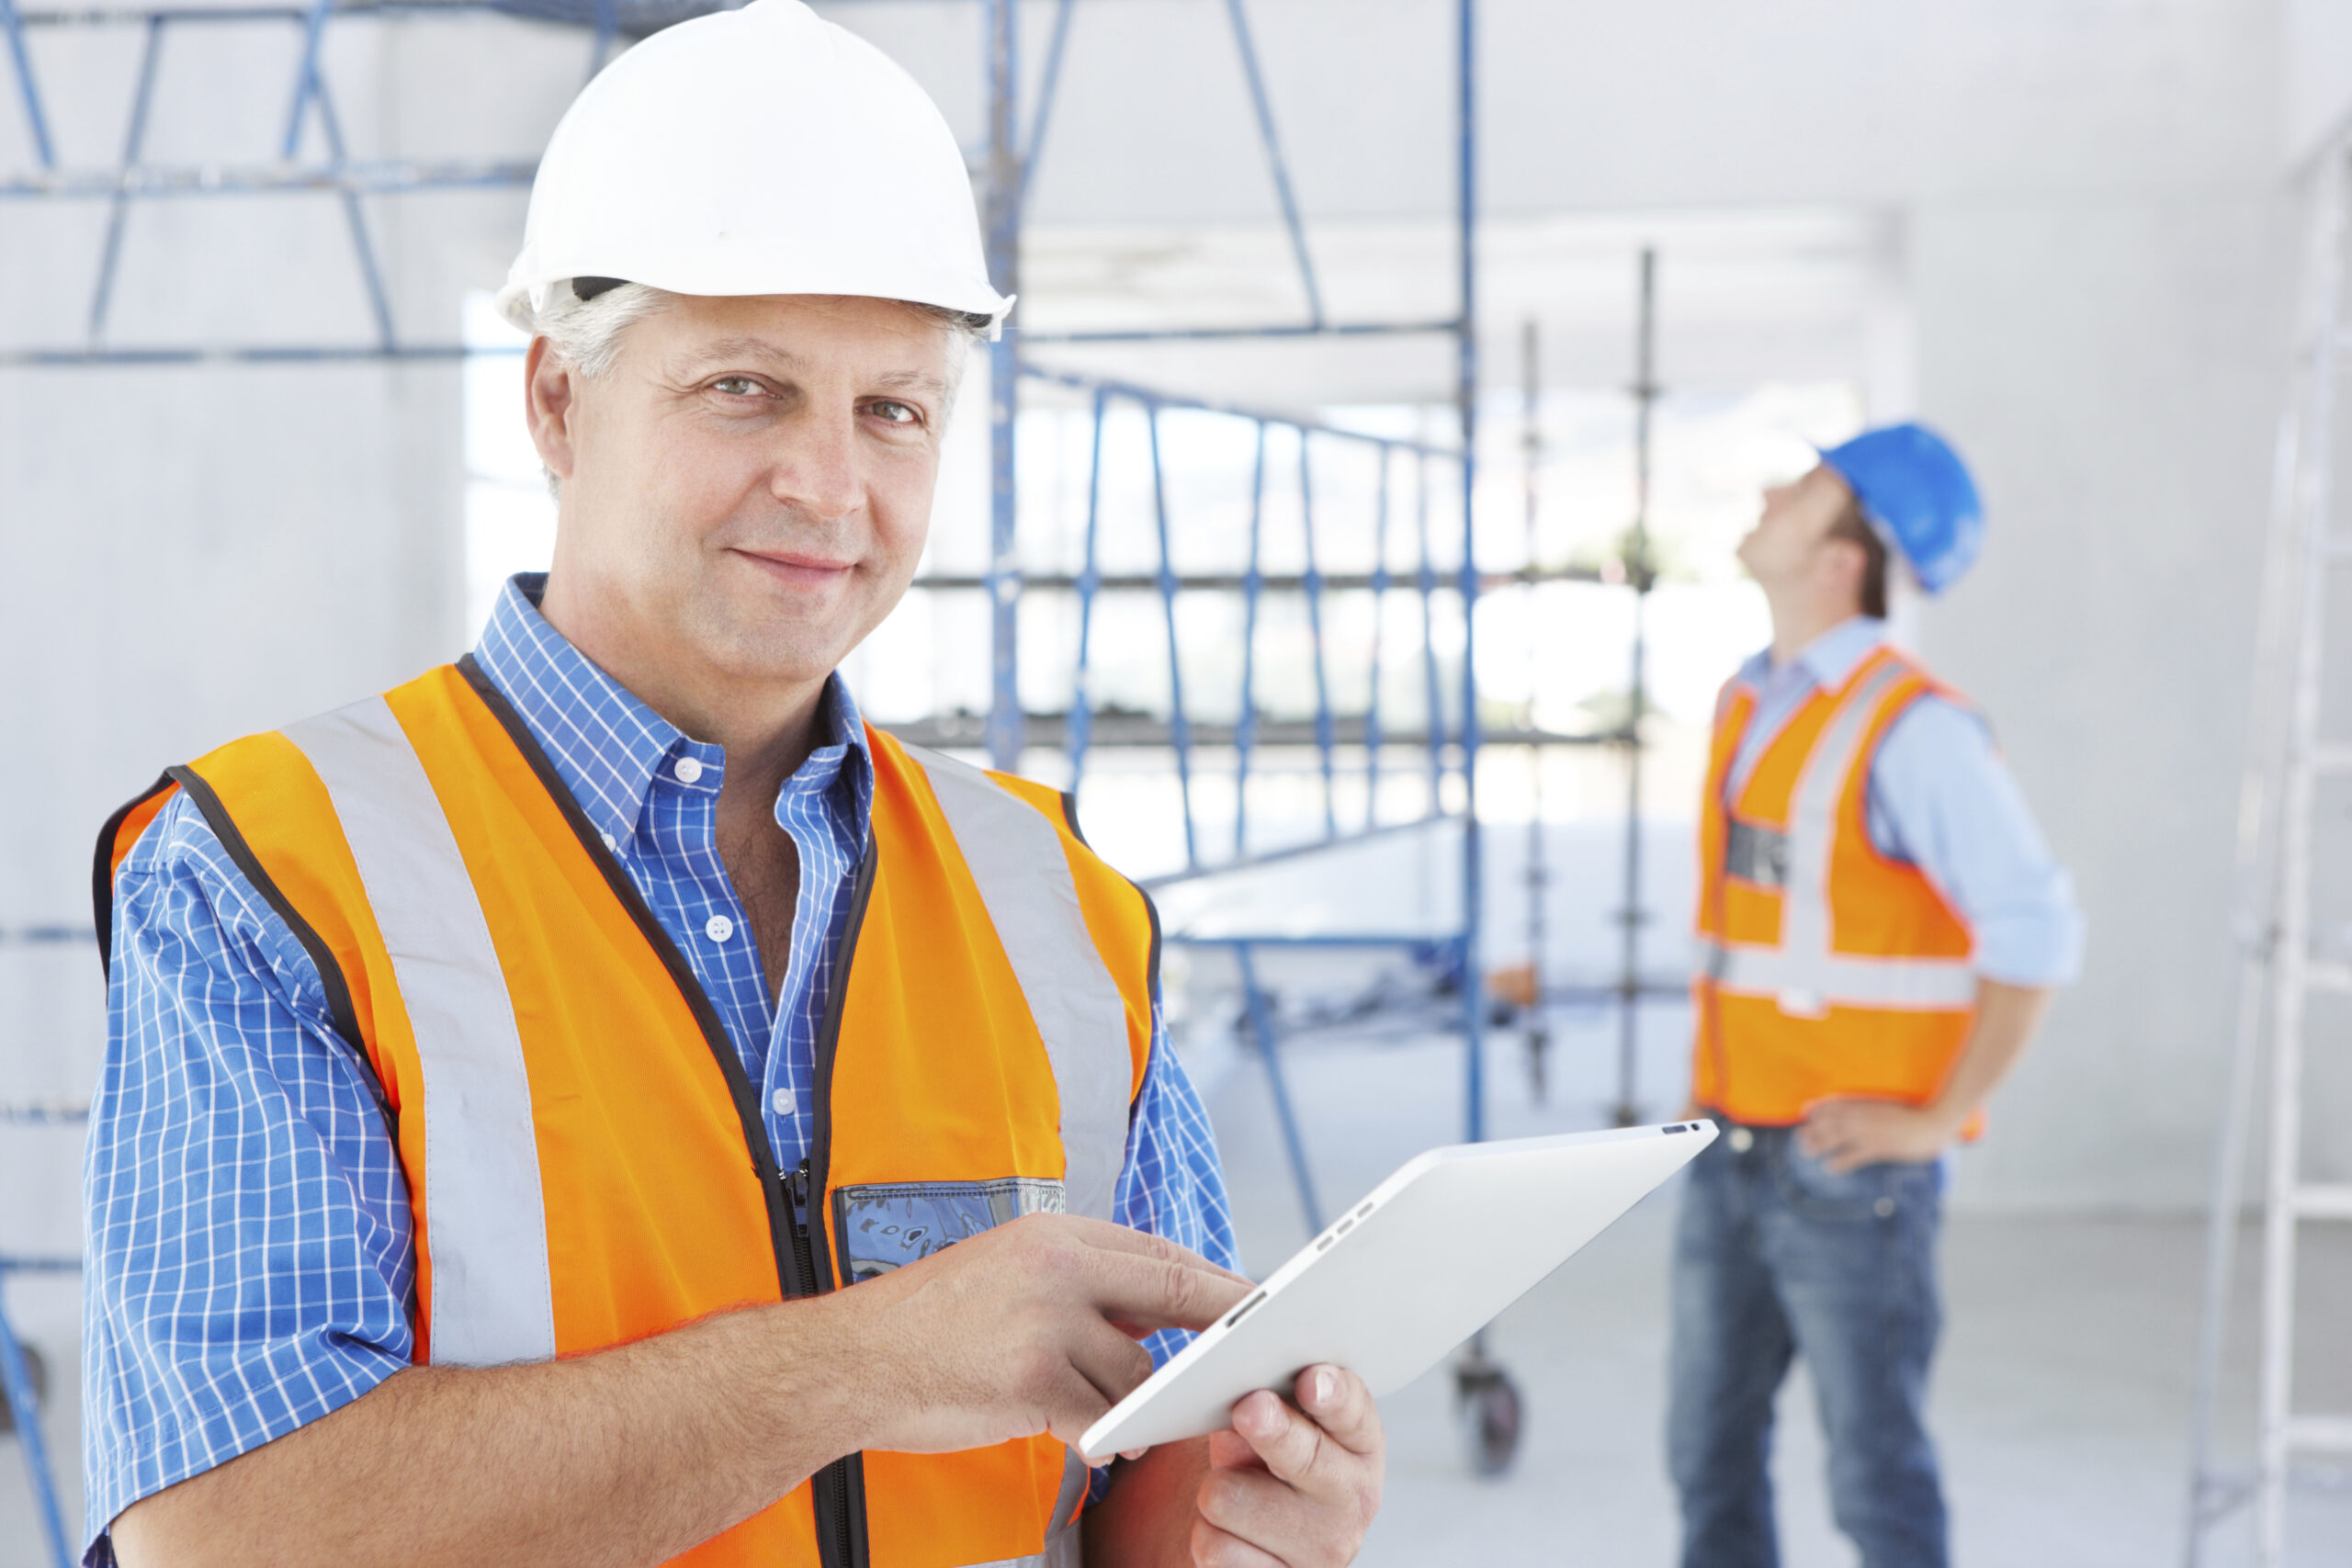 Employee or contractor? There is a difference